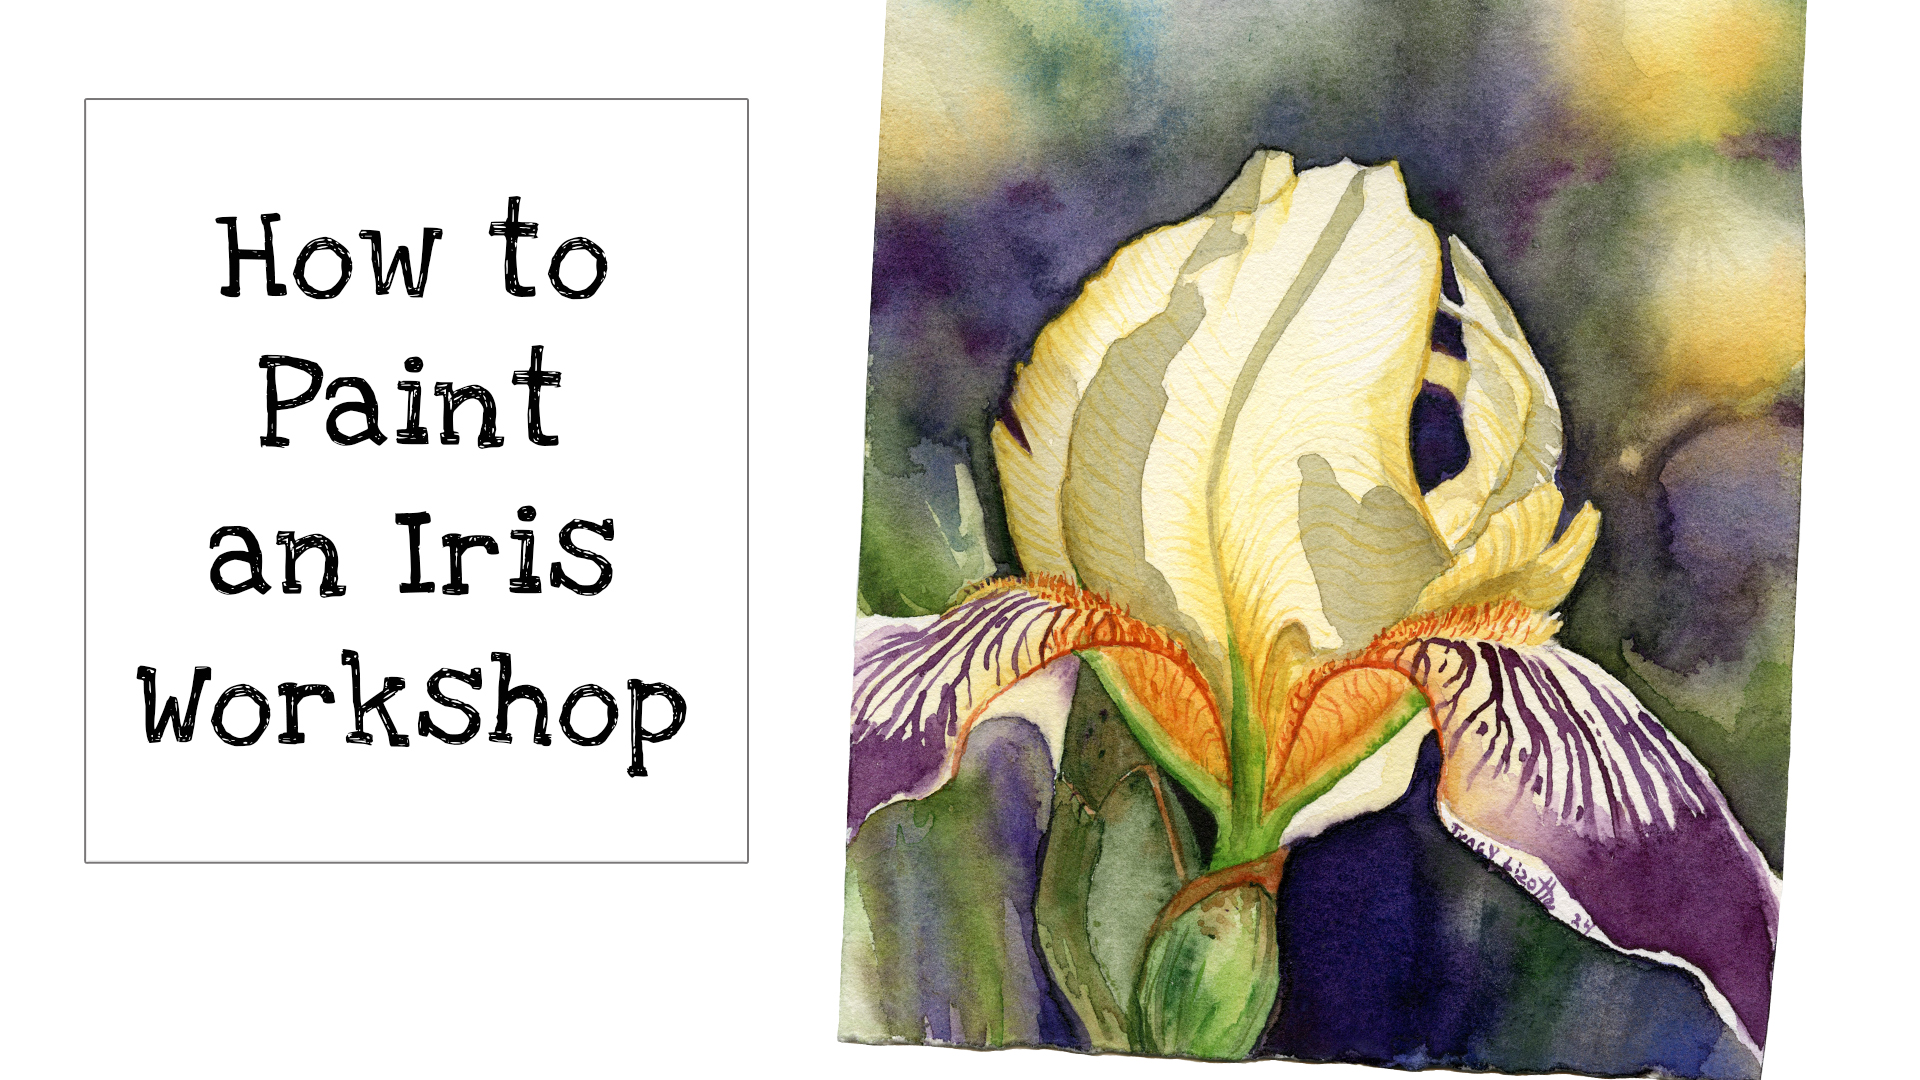 How to Paint am Iris with Watercolors 